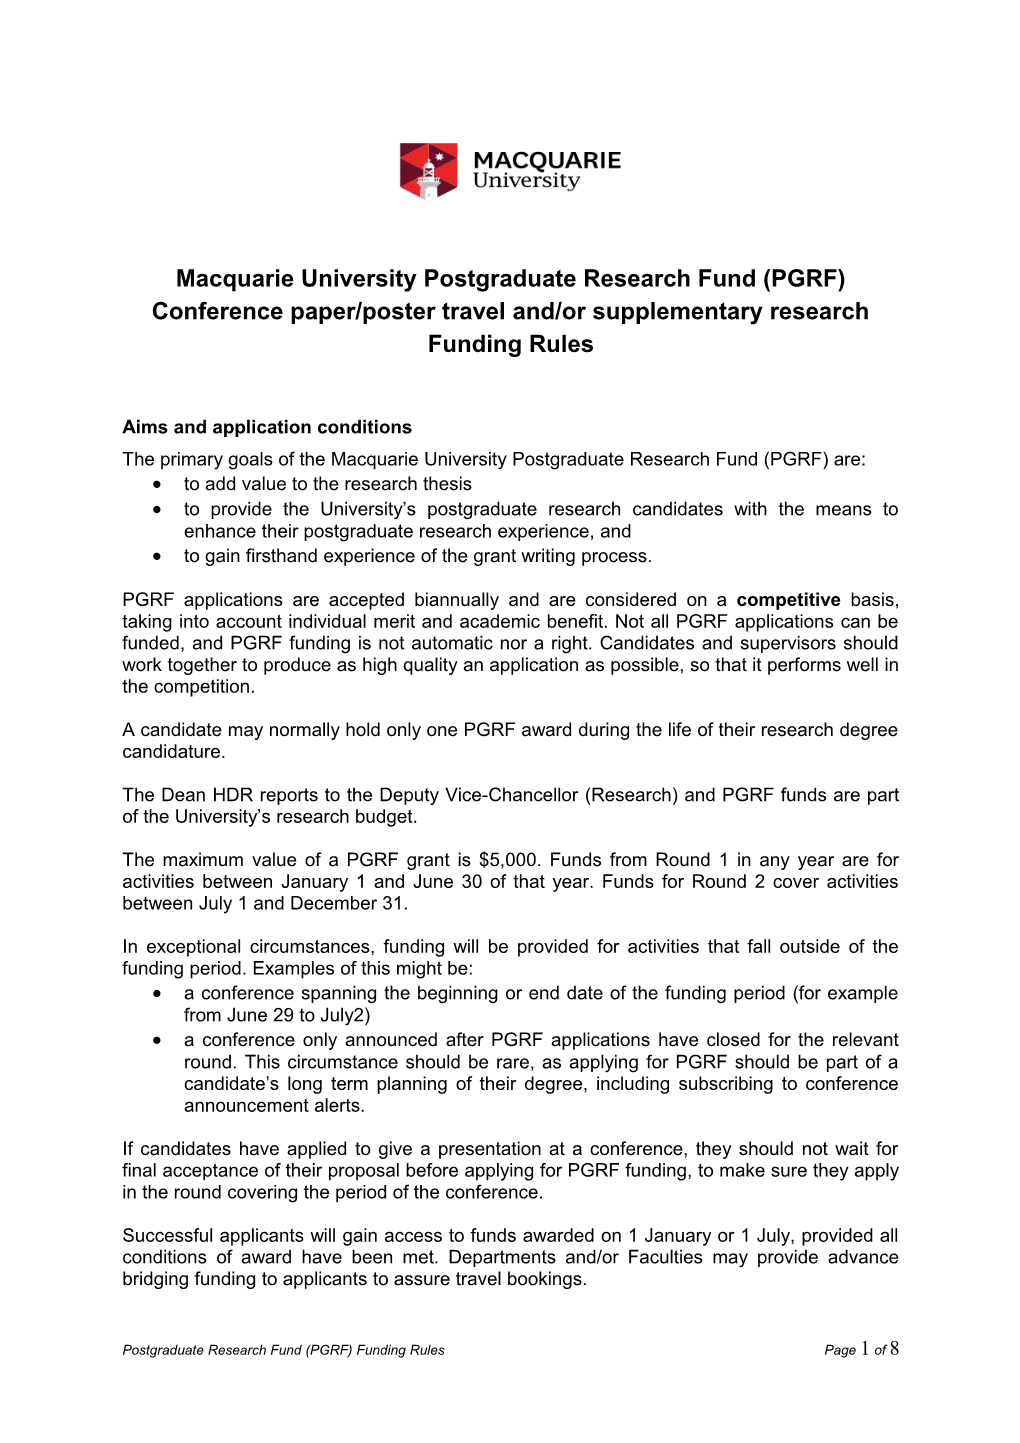 Macquarie University Postgraduate Research Fund (PGRF) Conference Paper/Poster Travel/Research